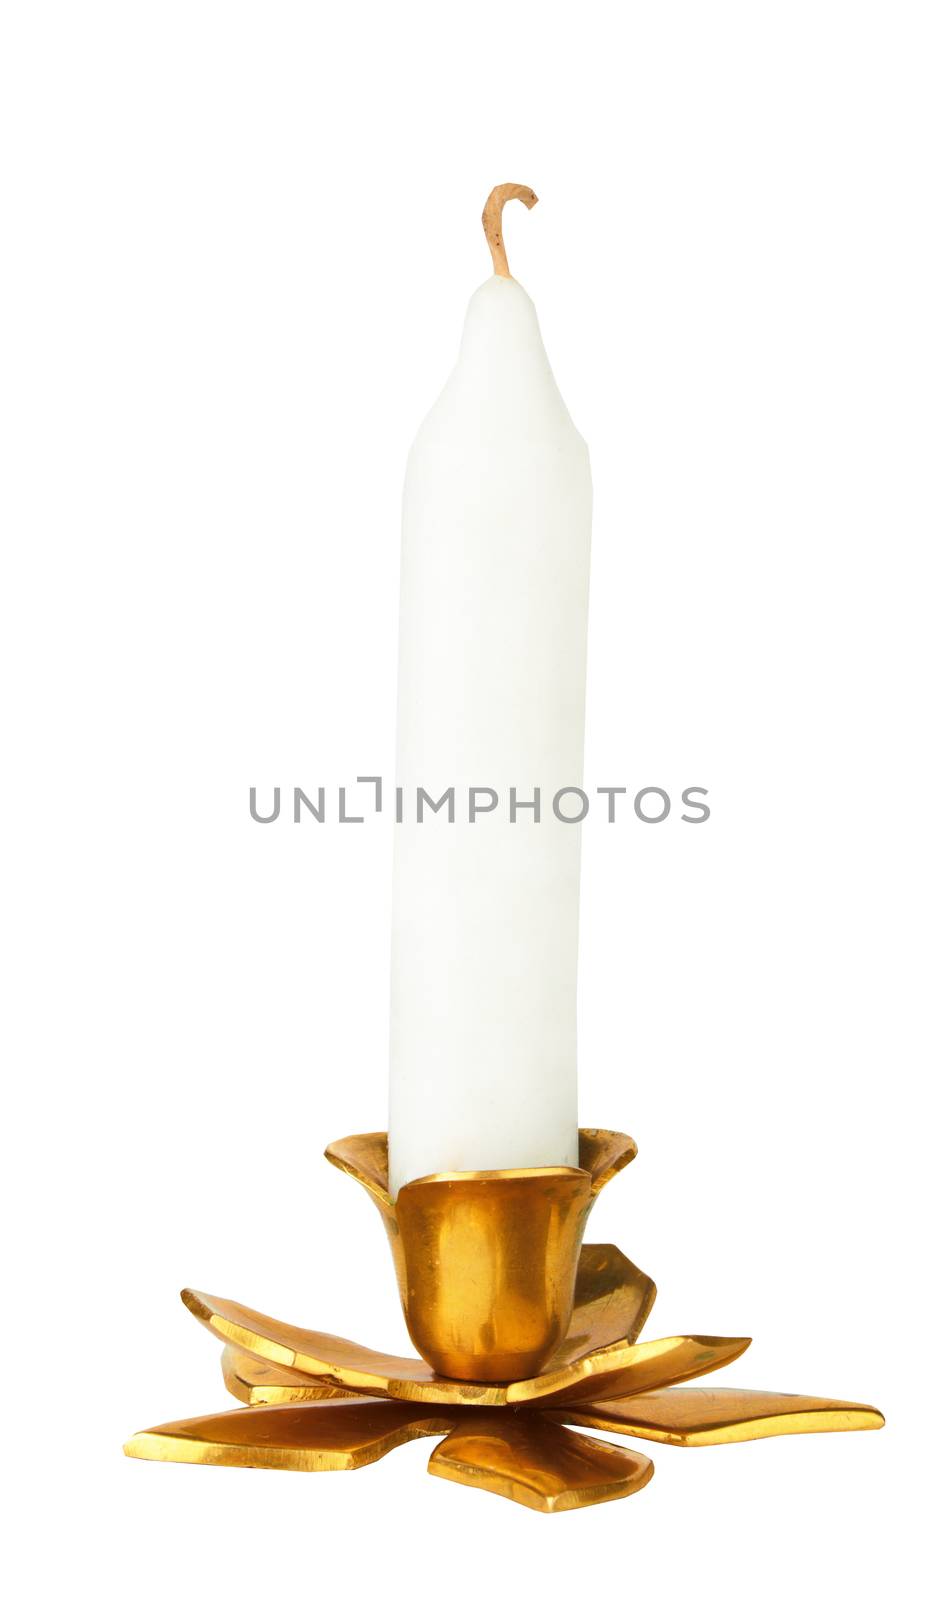 Candle in brass candlestick isolated on white background